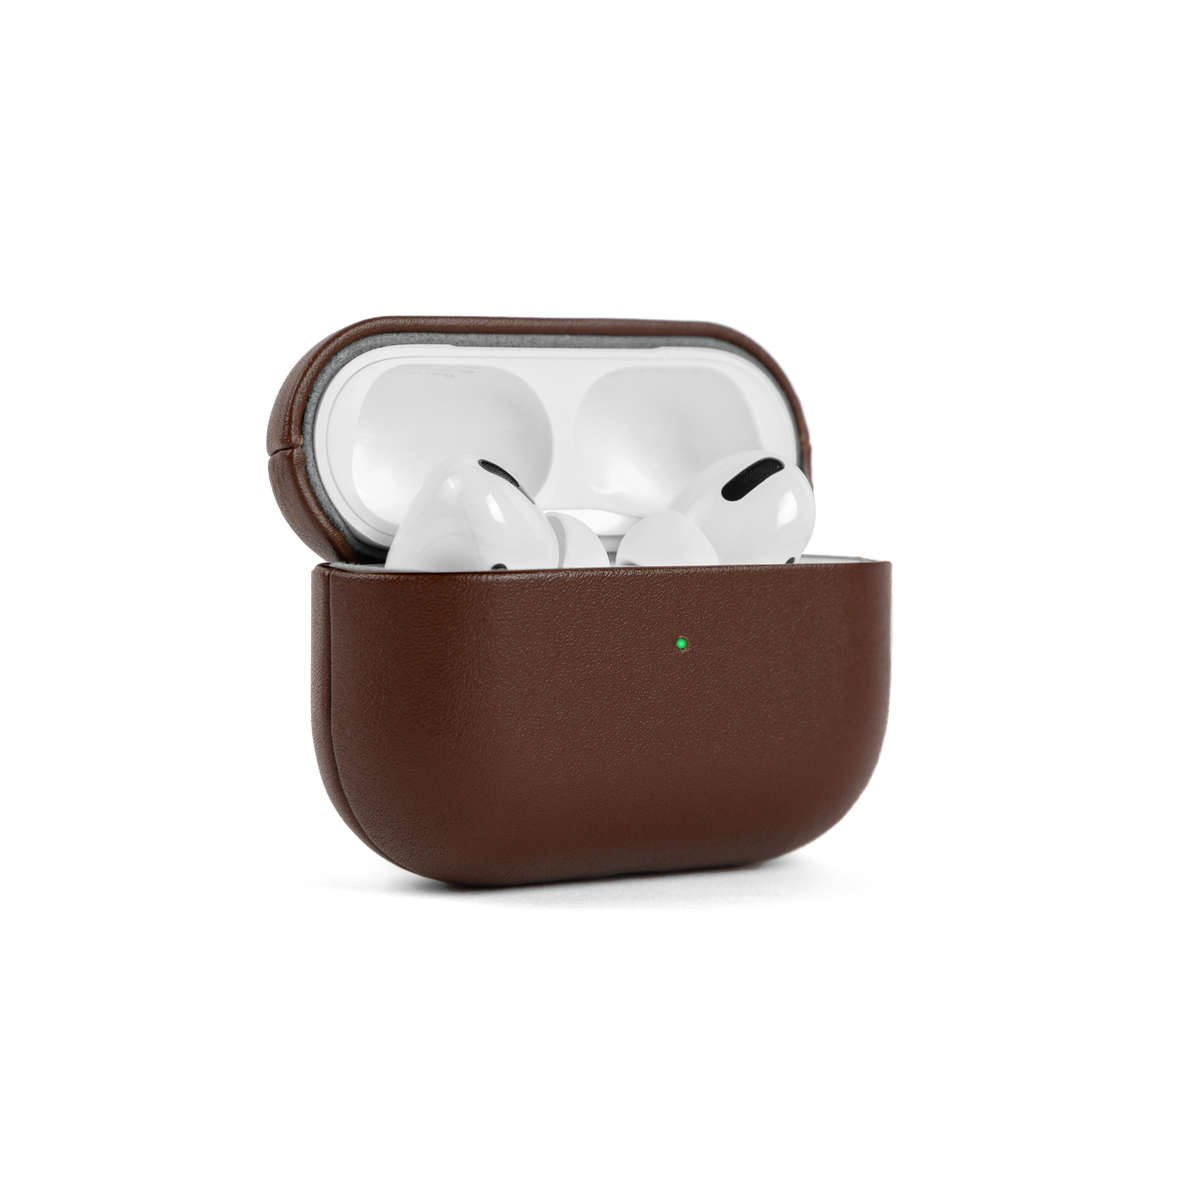 Apple's Airpods Pro in SANDMARC's Leather Case